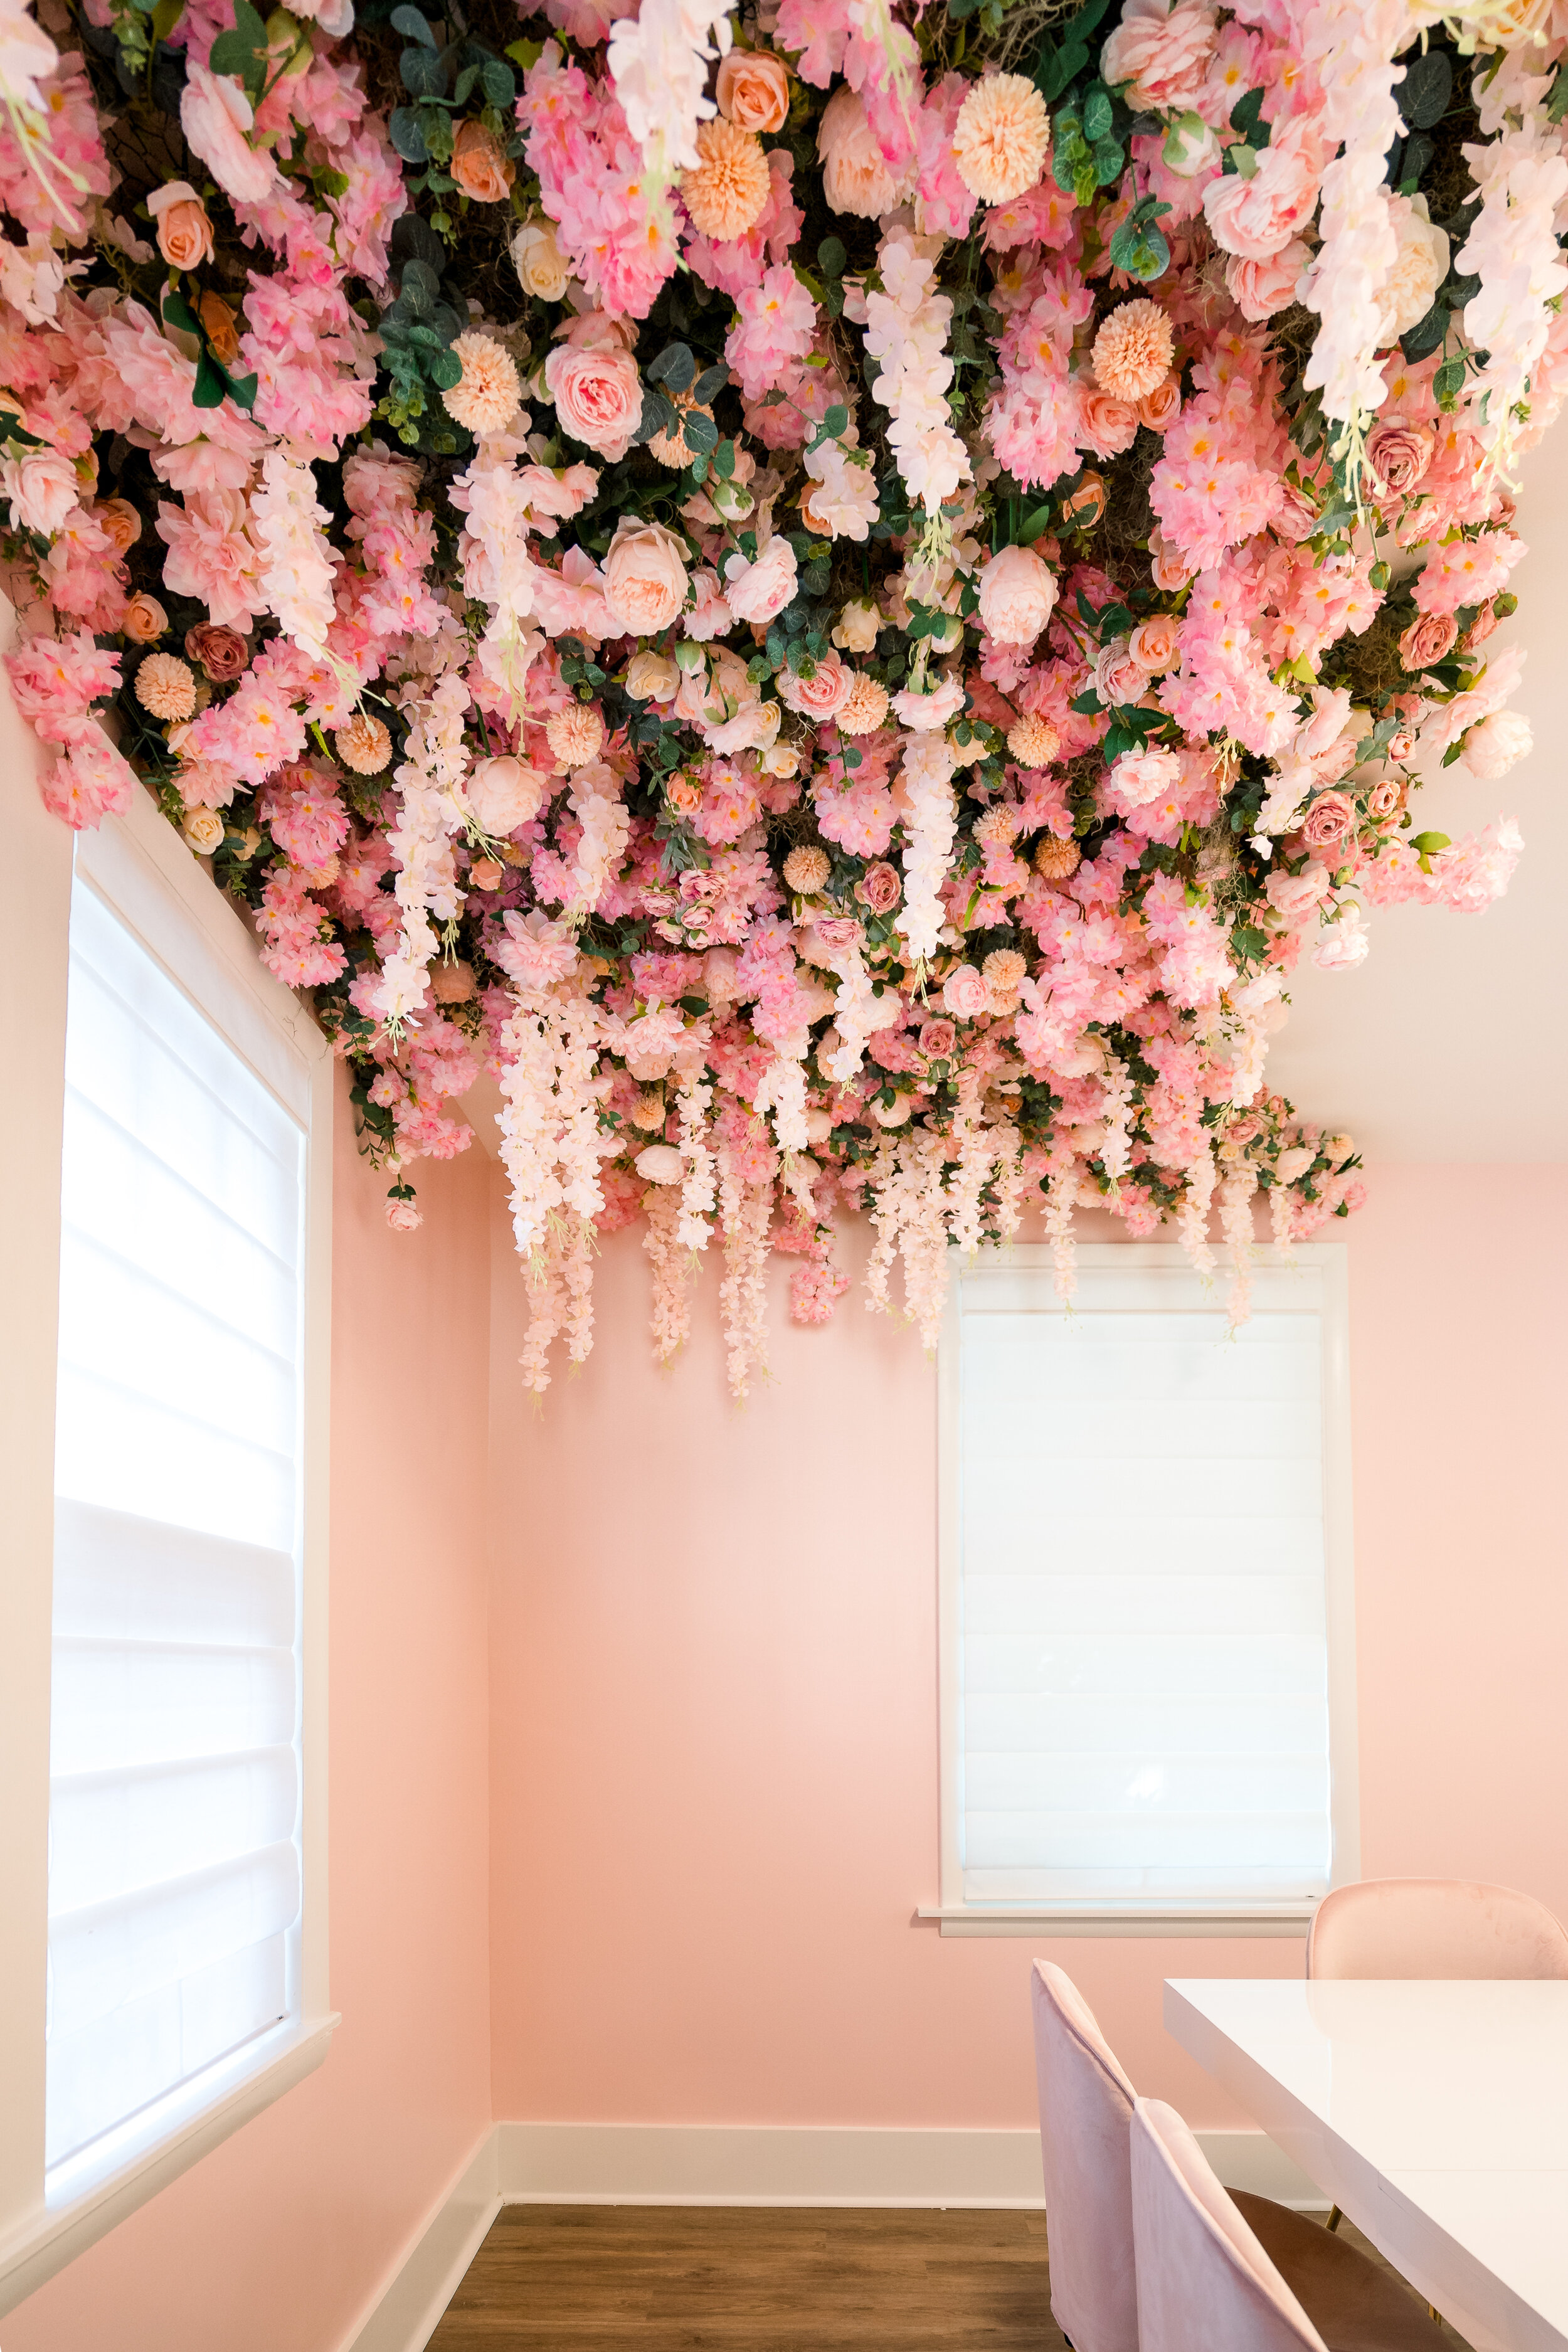 This bachelorette airbnb has a semi permanent ceiling installation full of faux cherry blossom, blush dahlias, pink roses, hanging wisteria, and spanish moss. Designed by florist Rosemary & Finch in Nashville, TN.